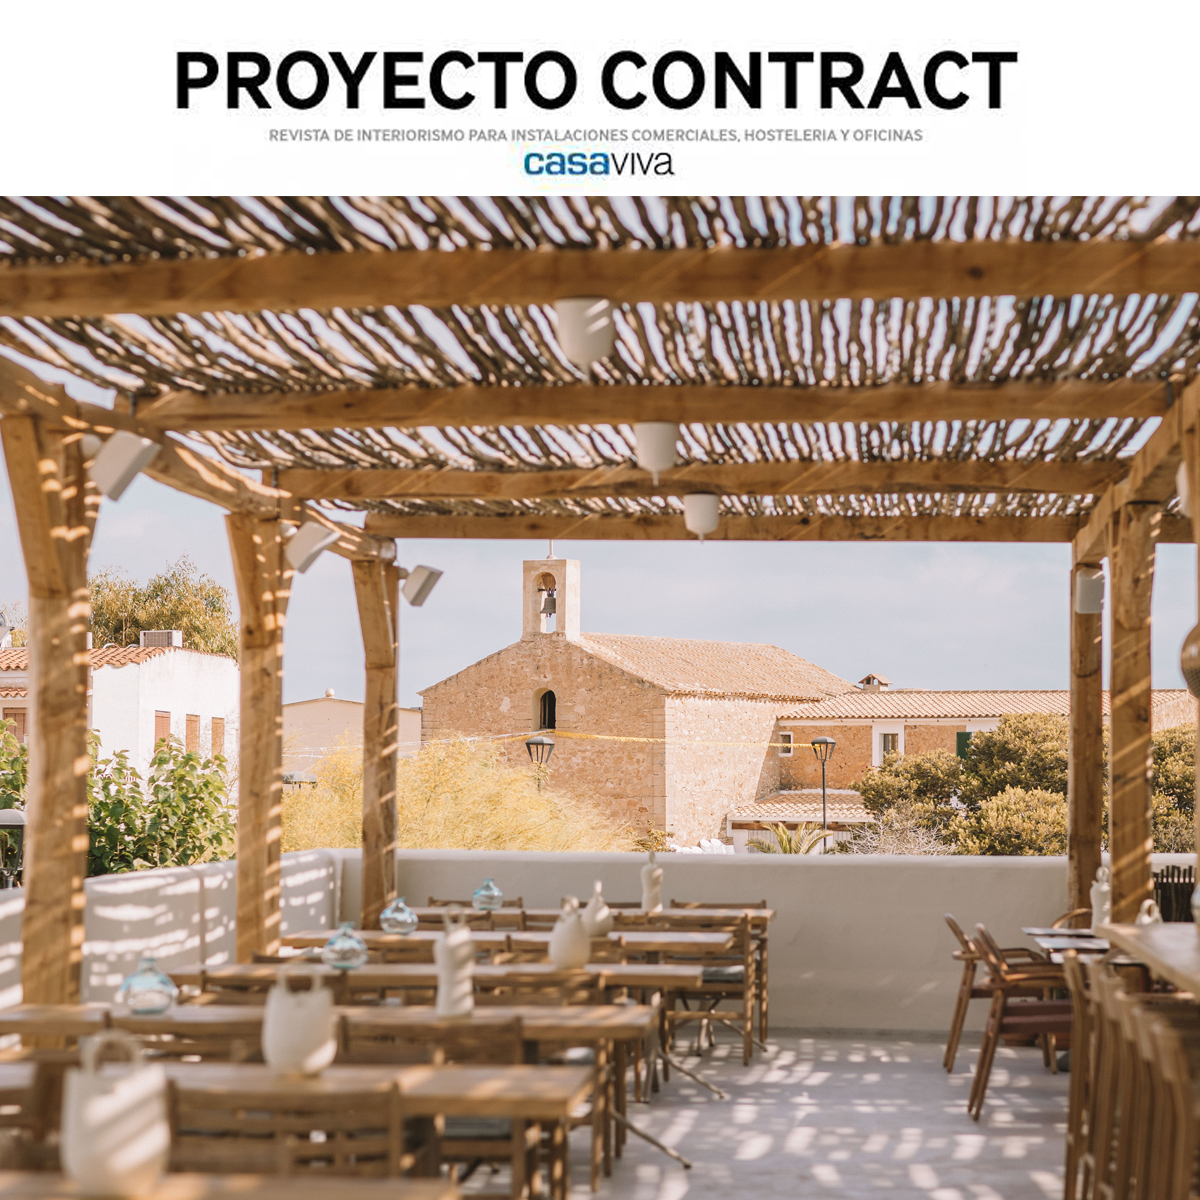 Proyecto Contract